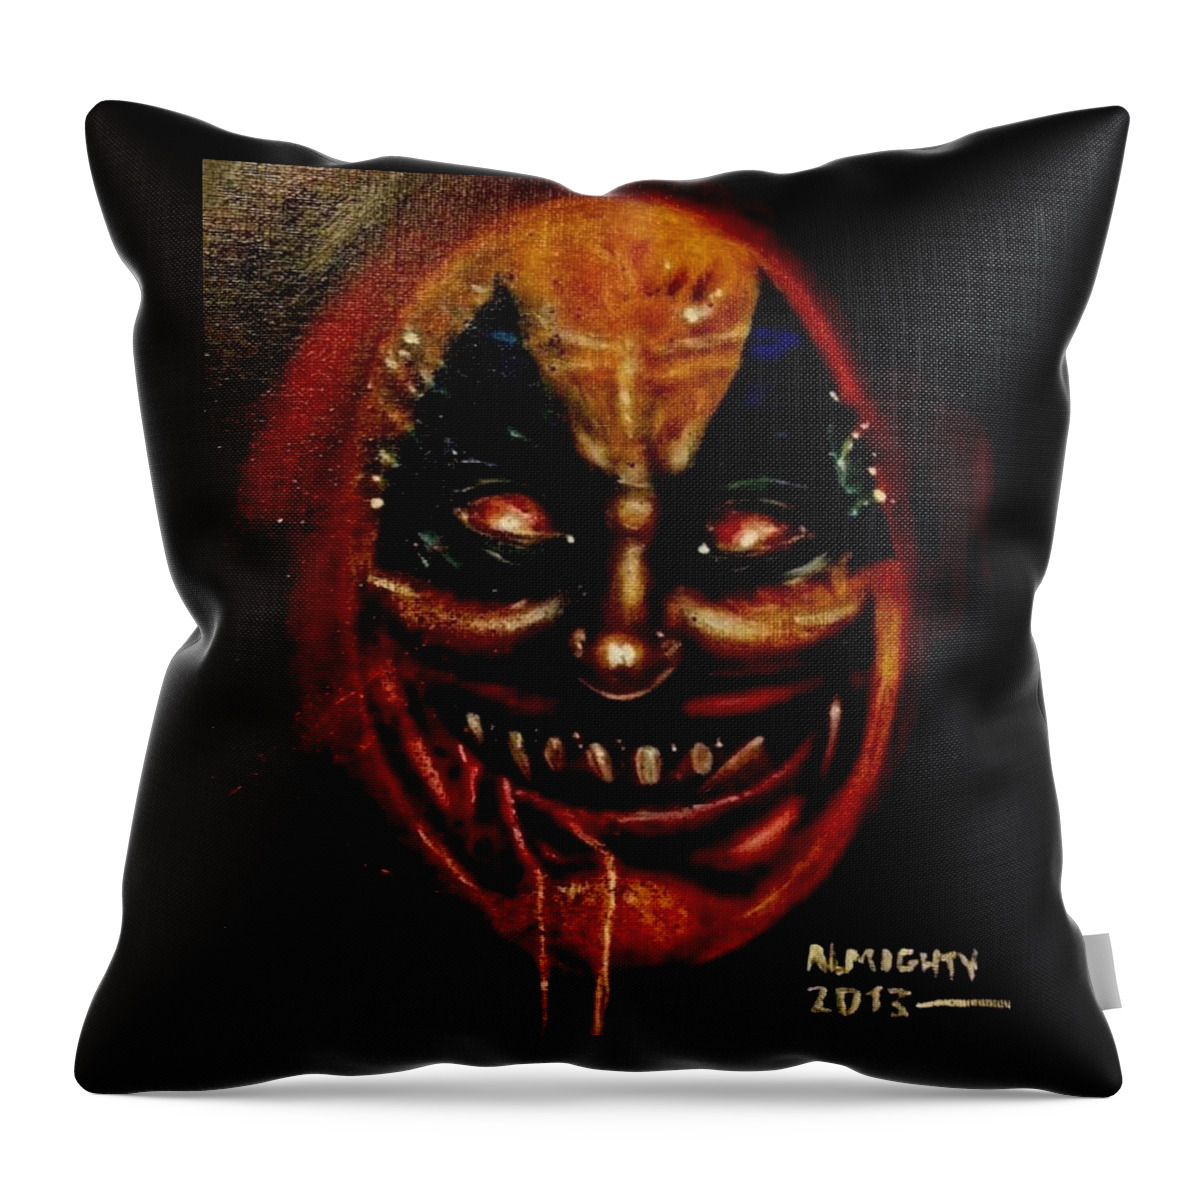 John Wayne Gacy Throw Pillow featuring the painting Gacy In Hell by Ryan Almighty